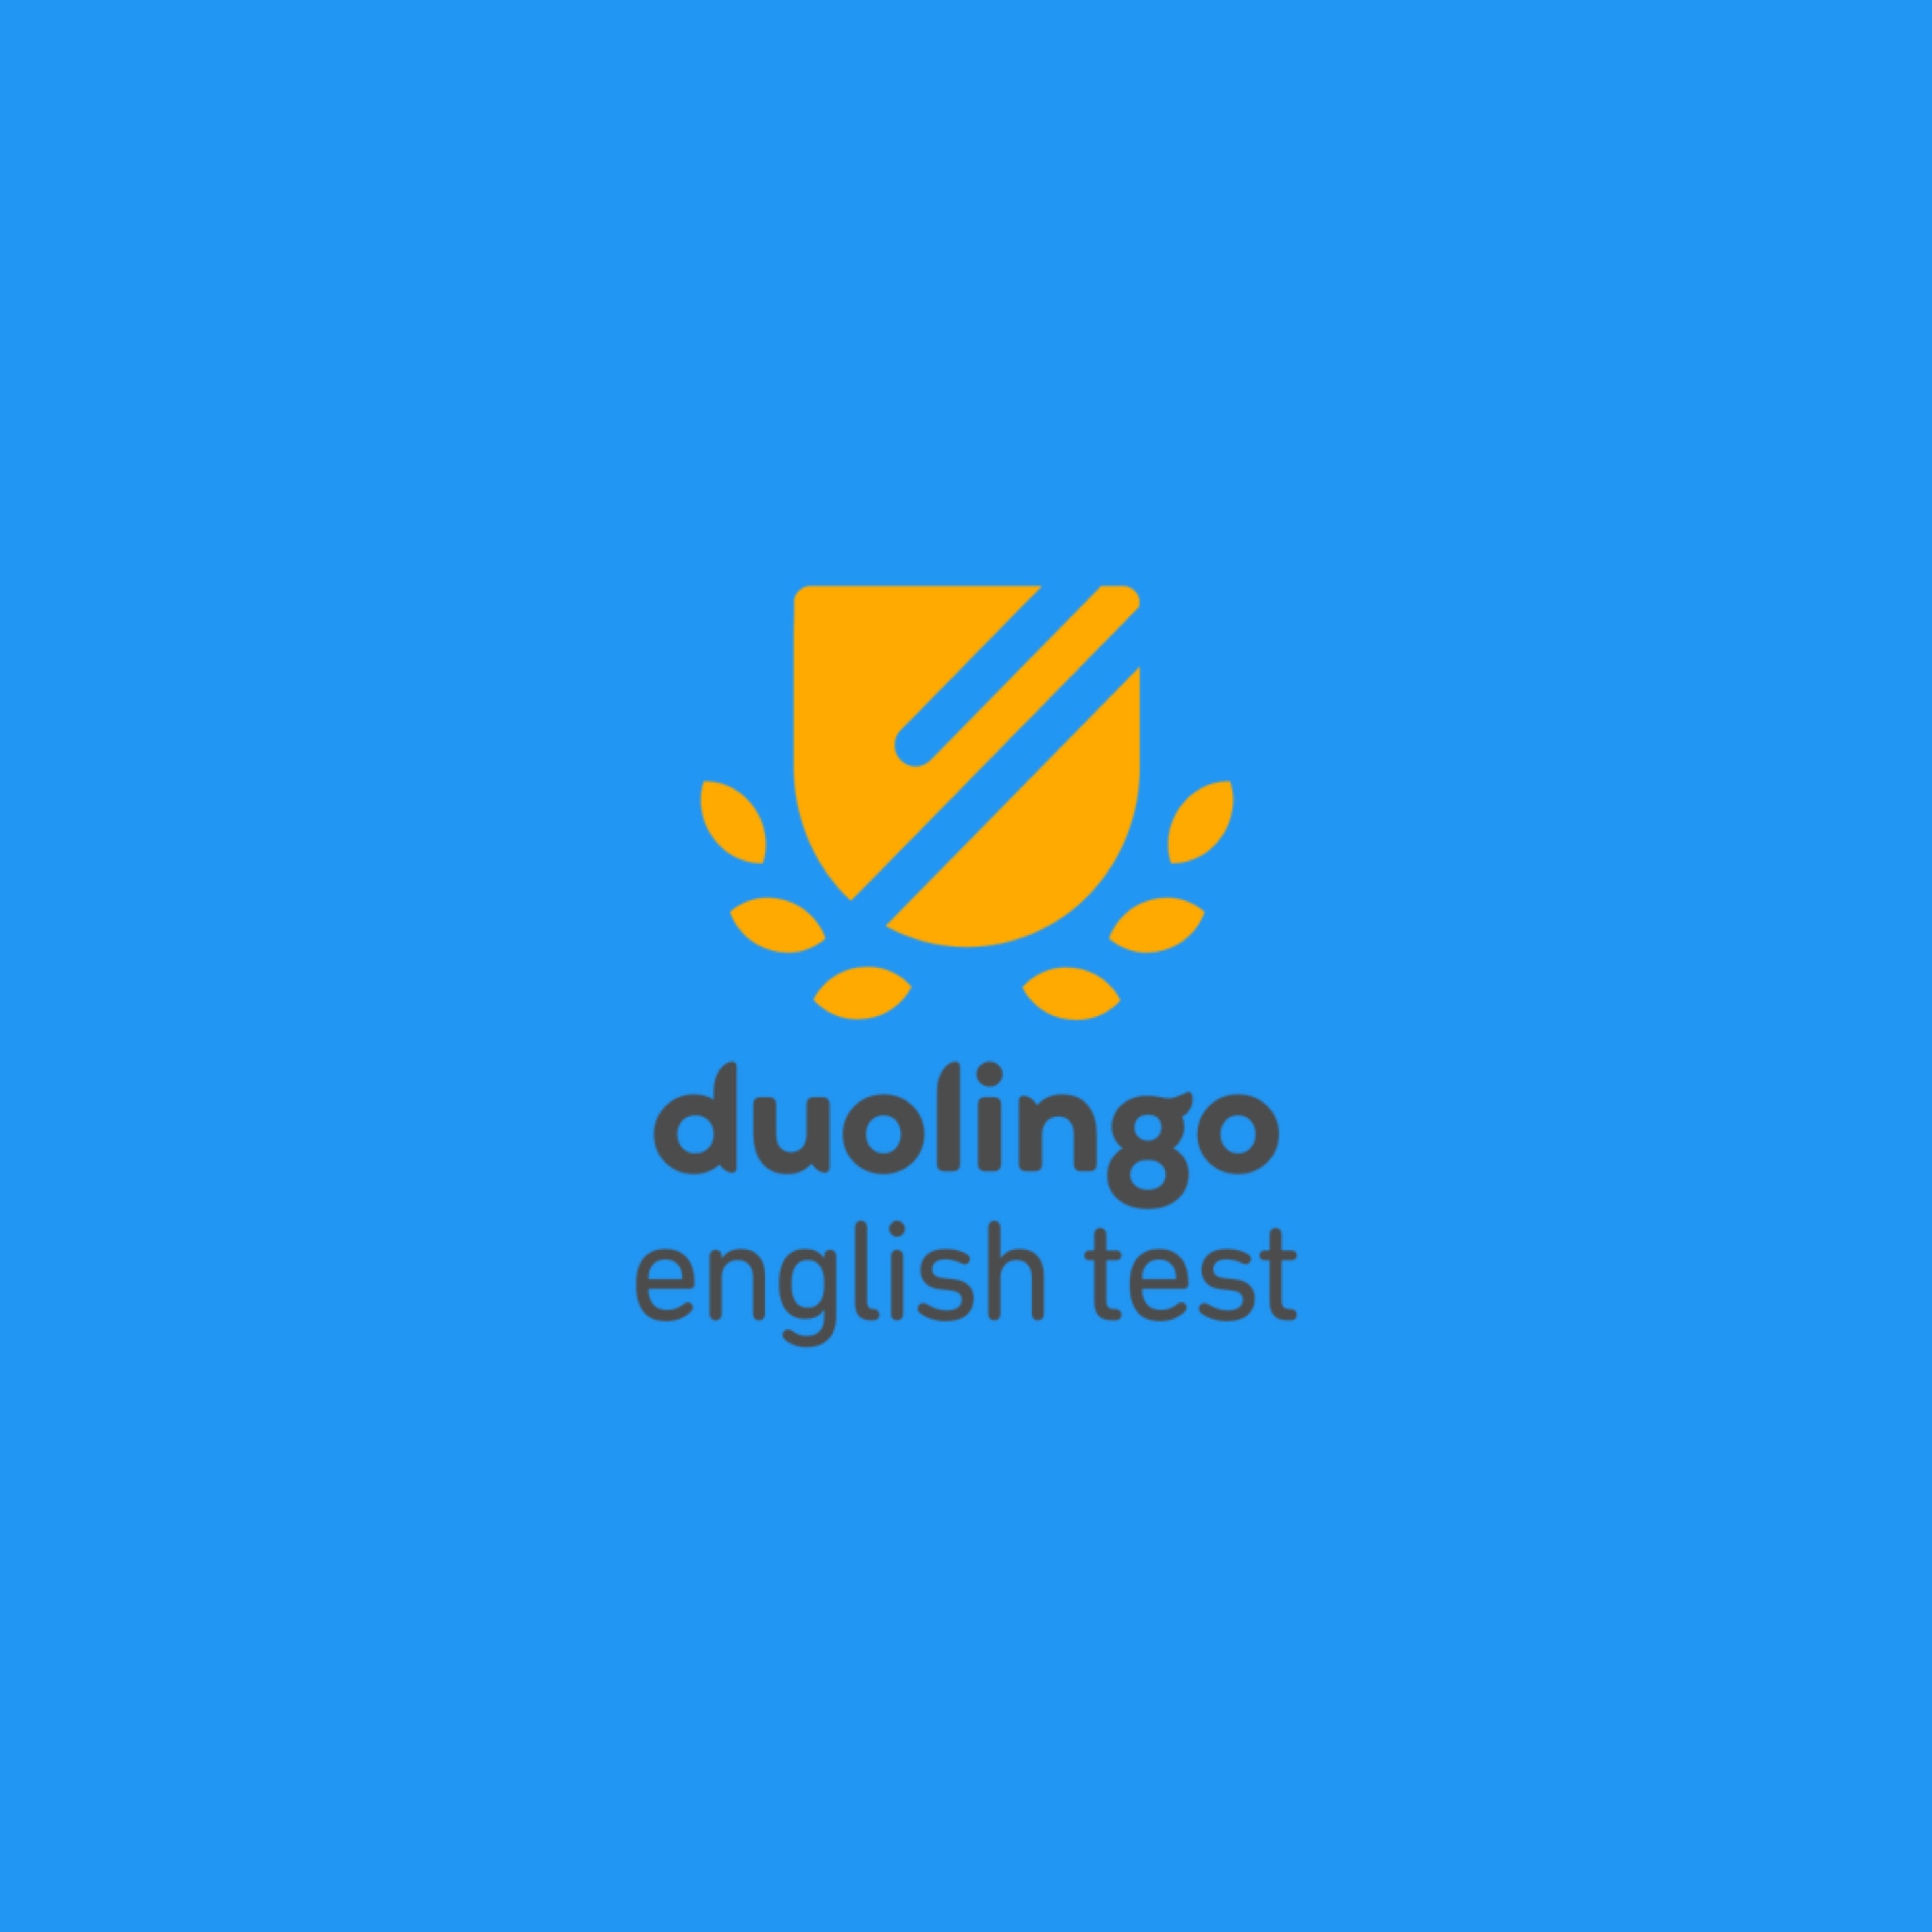 Is There Cheating on Duolingo?